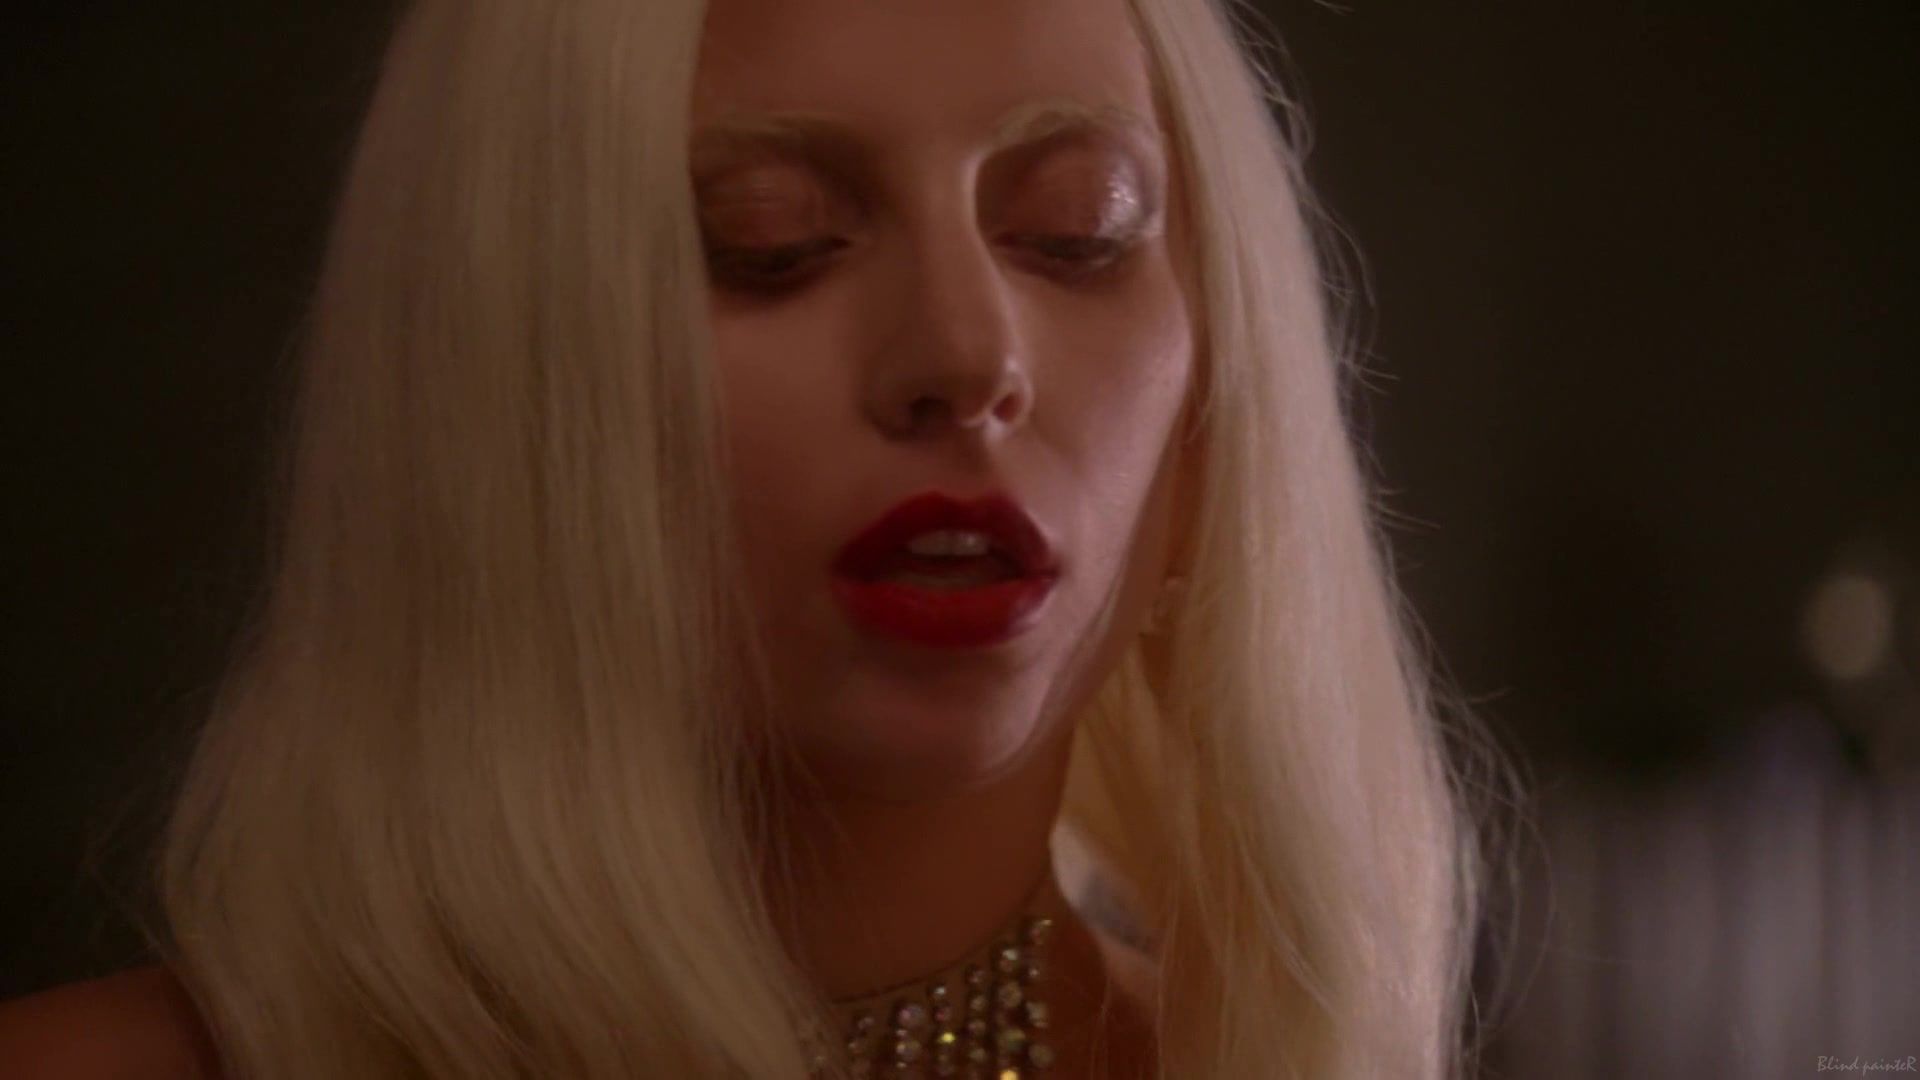 Nice Sex video Lady Gaga & Chasty Ballesteros nude - American Horror Story S05E01 (2015) Backpage - 2